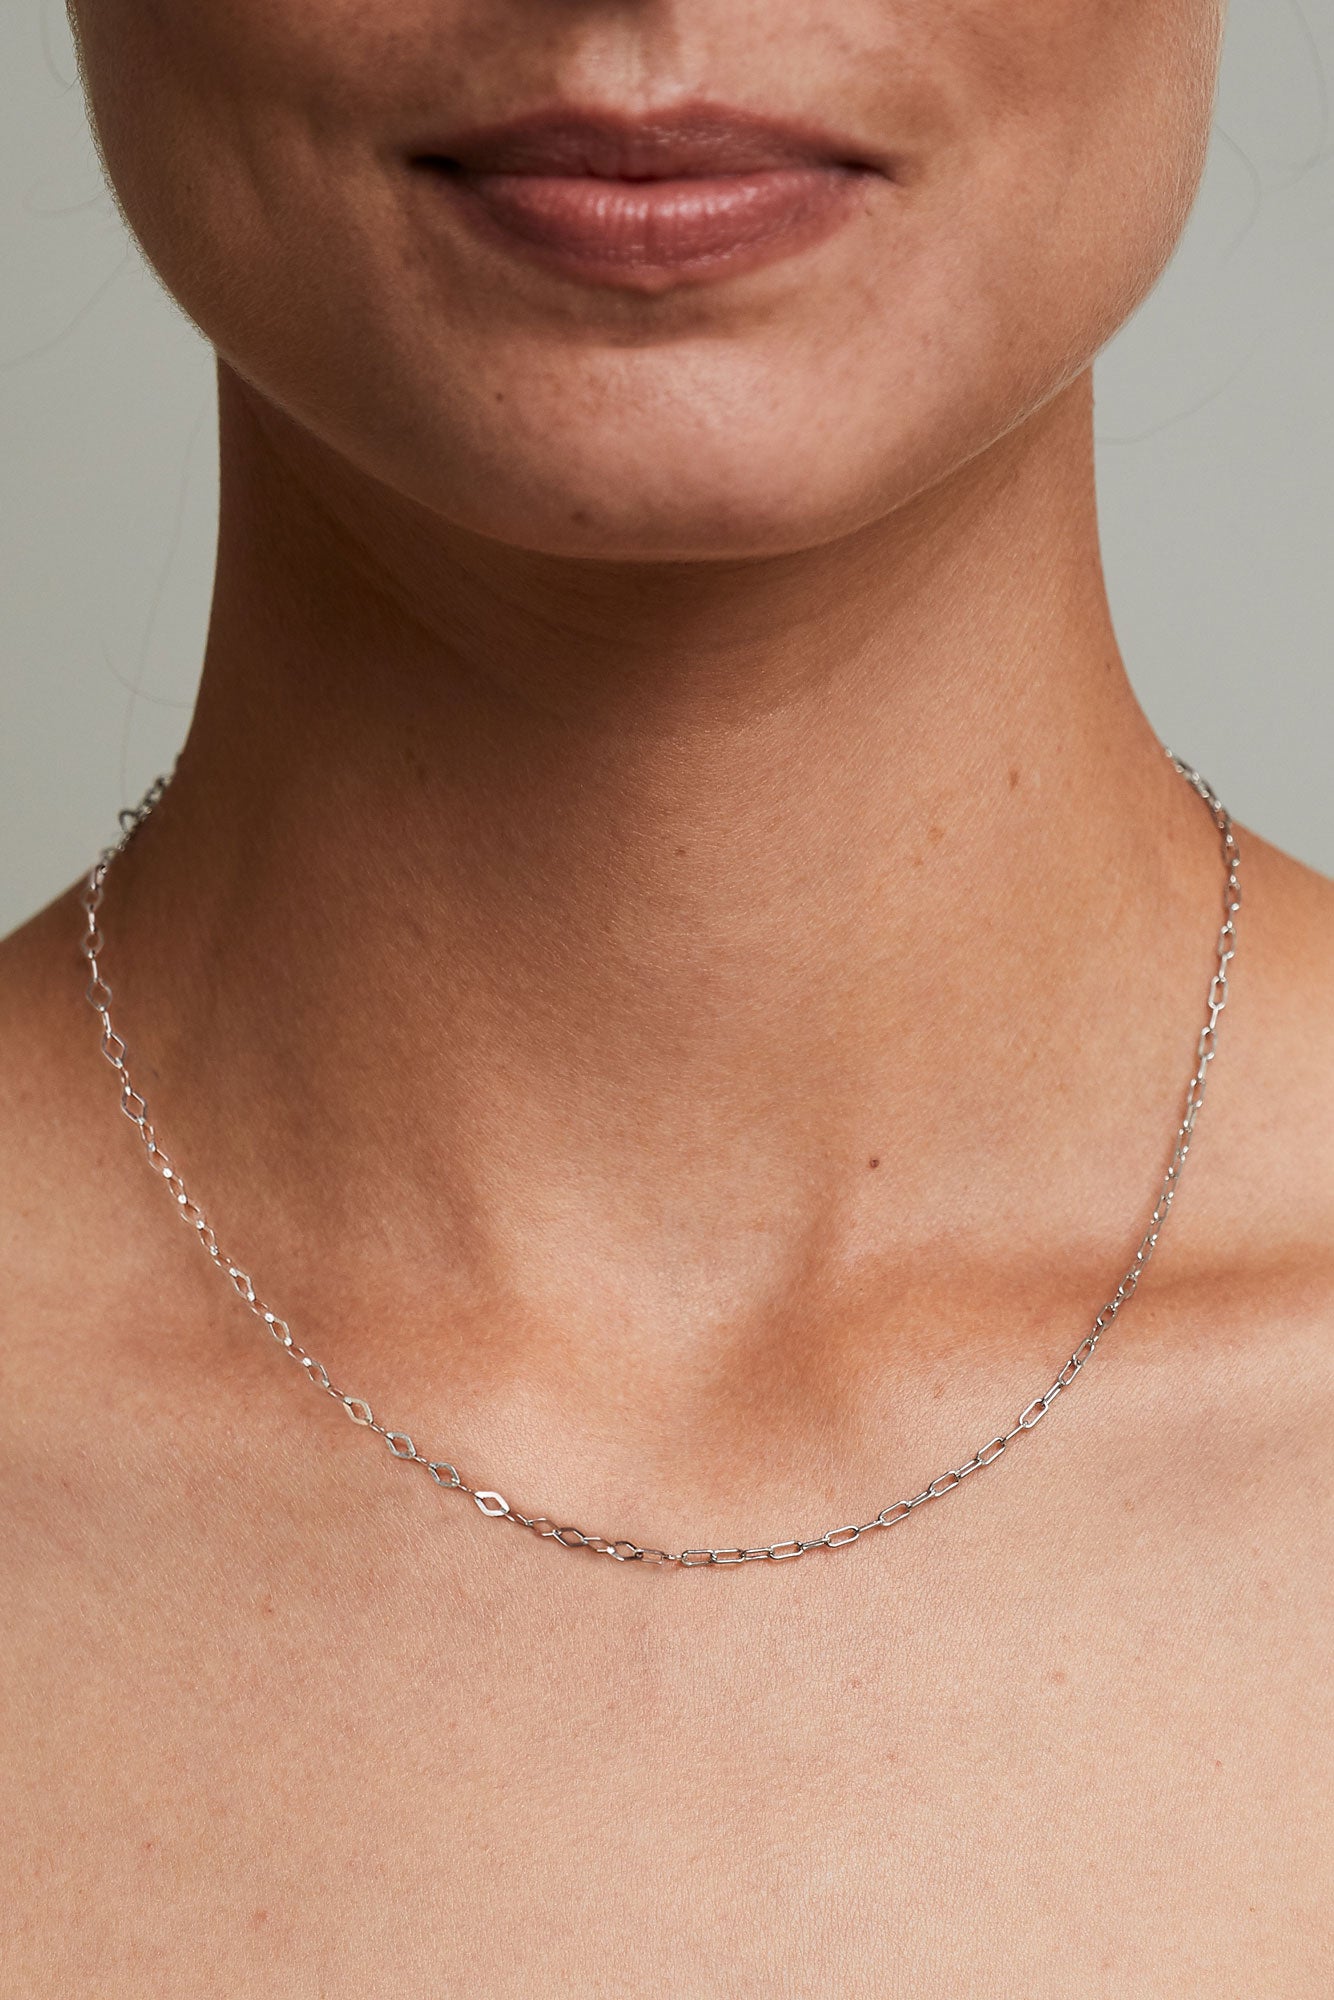 just diamonds necklace – related by objects